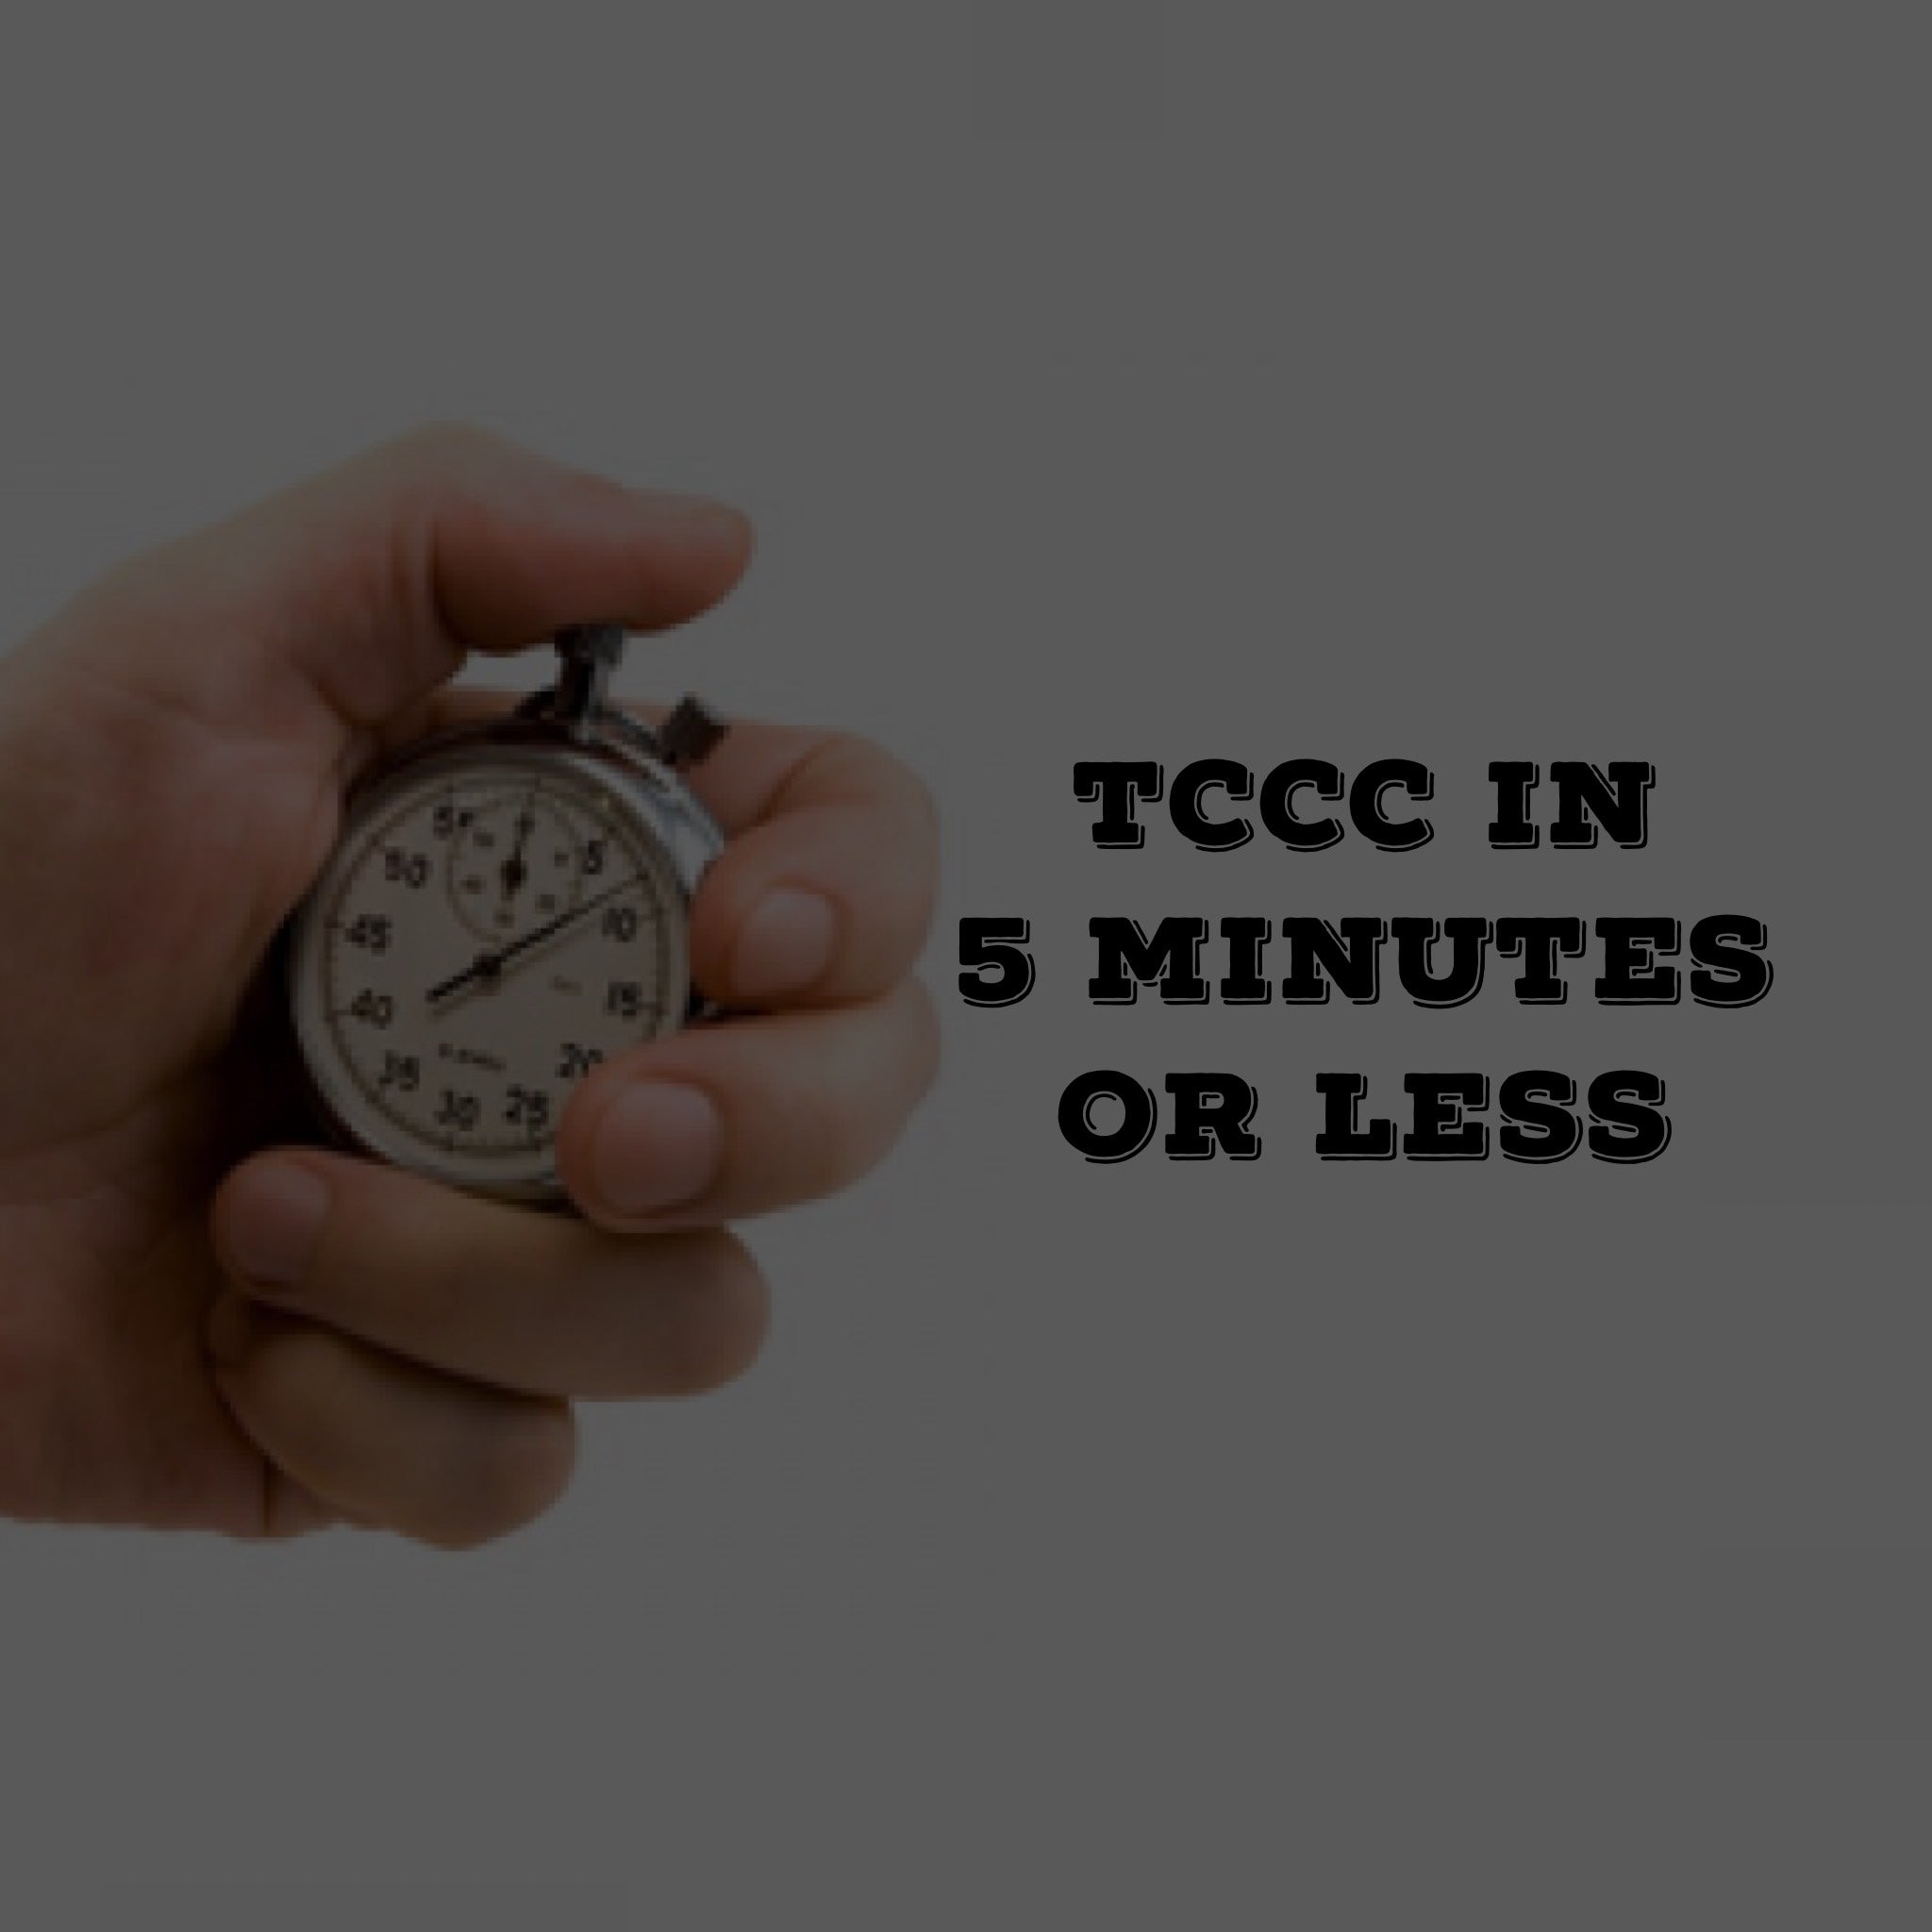 TCCC in 5 minutes or less